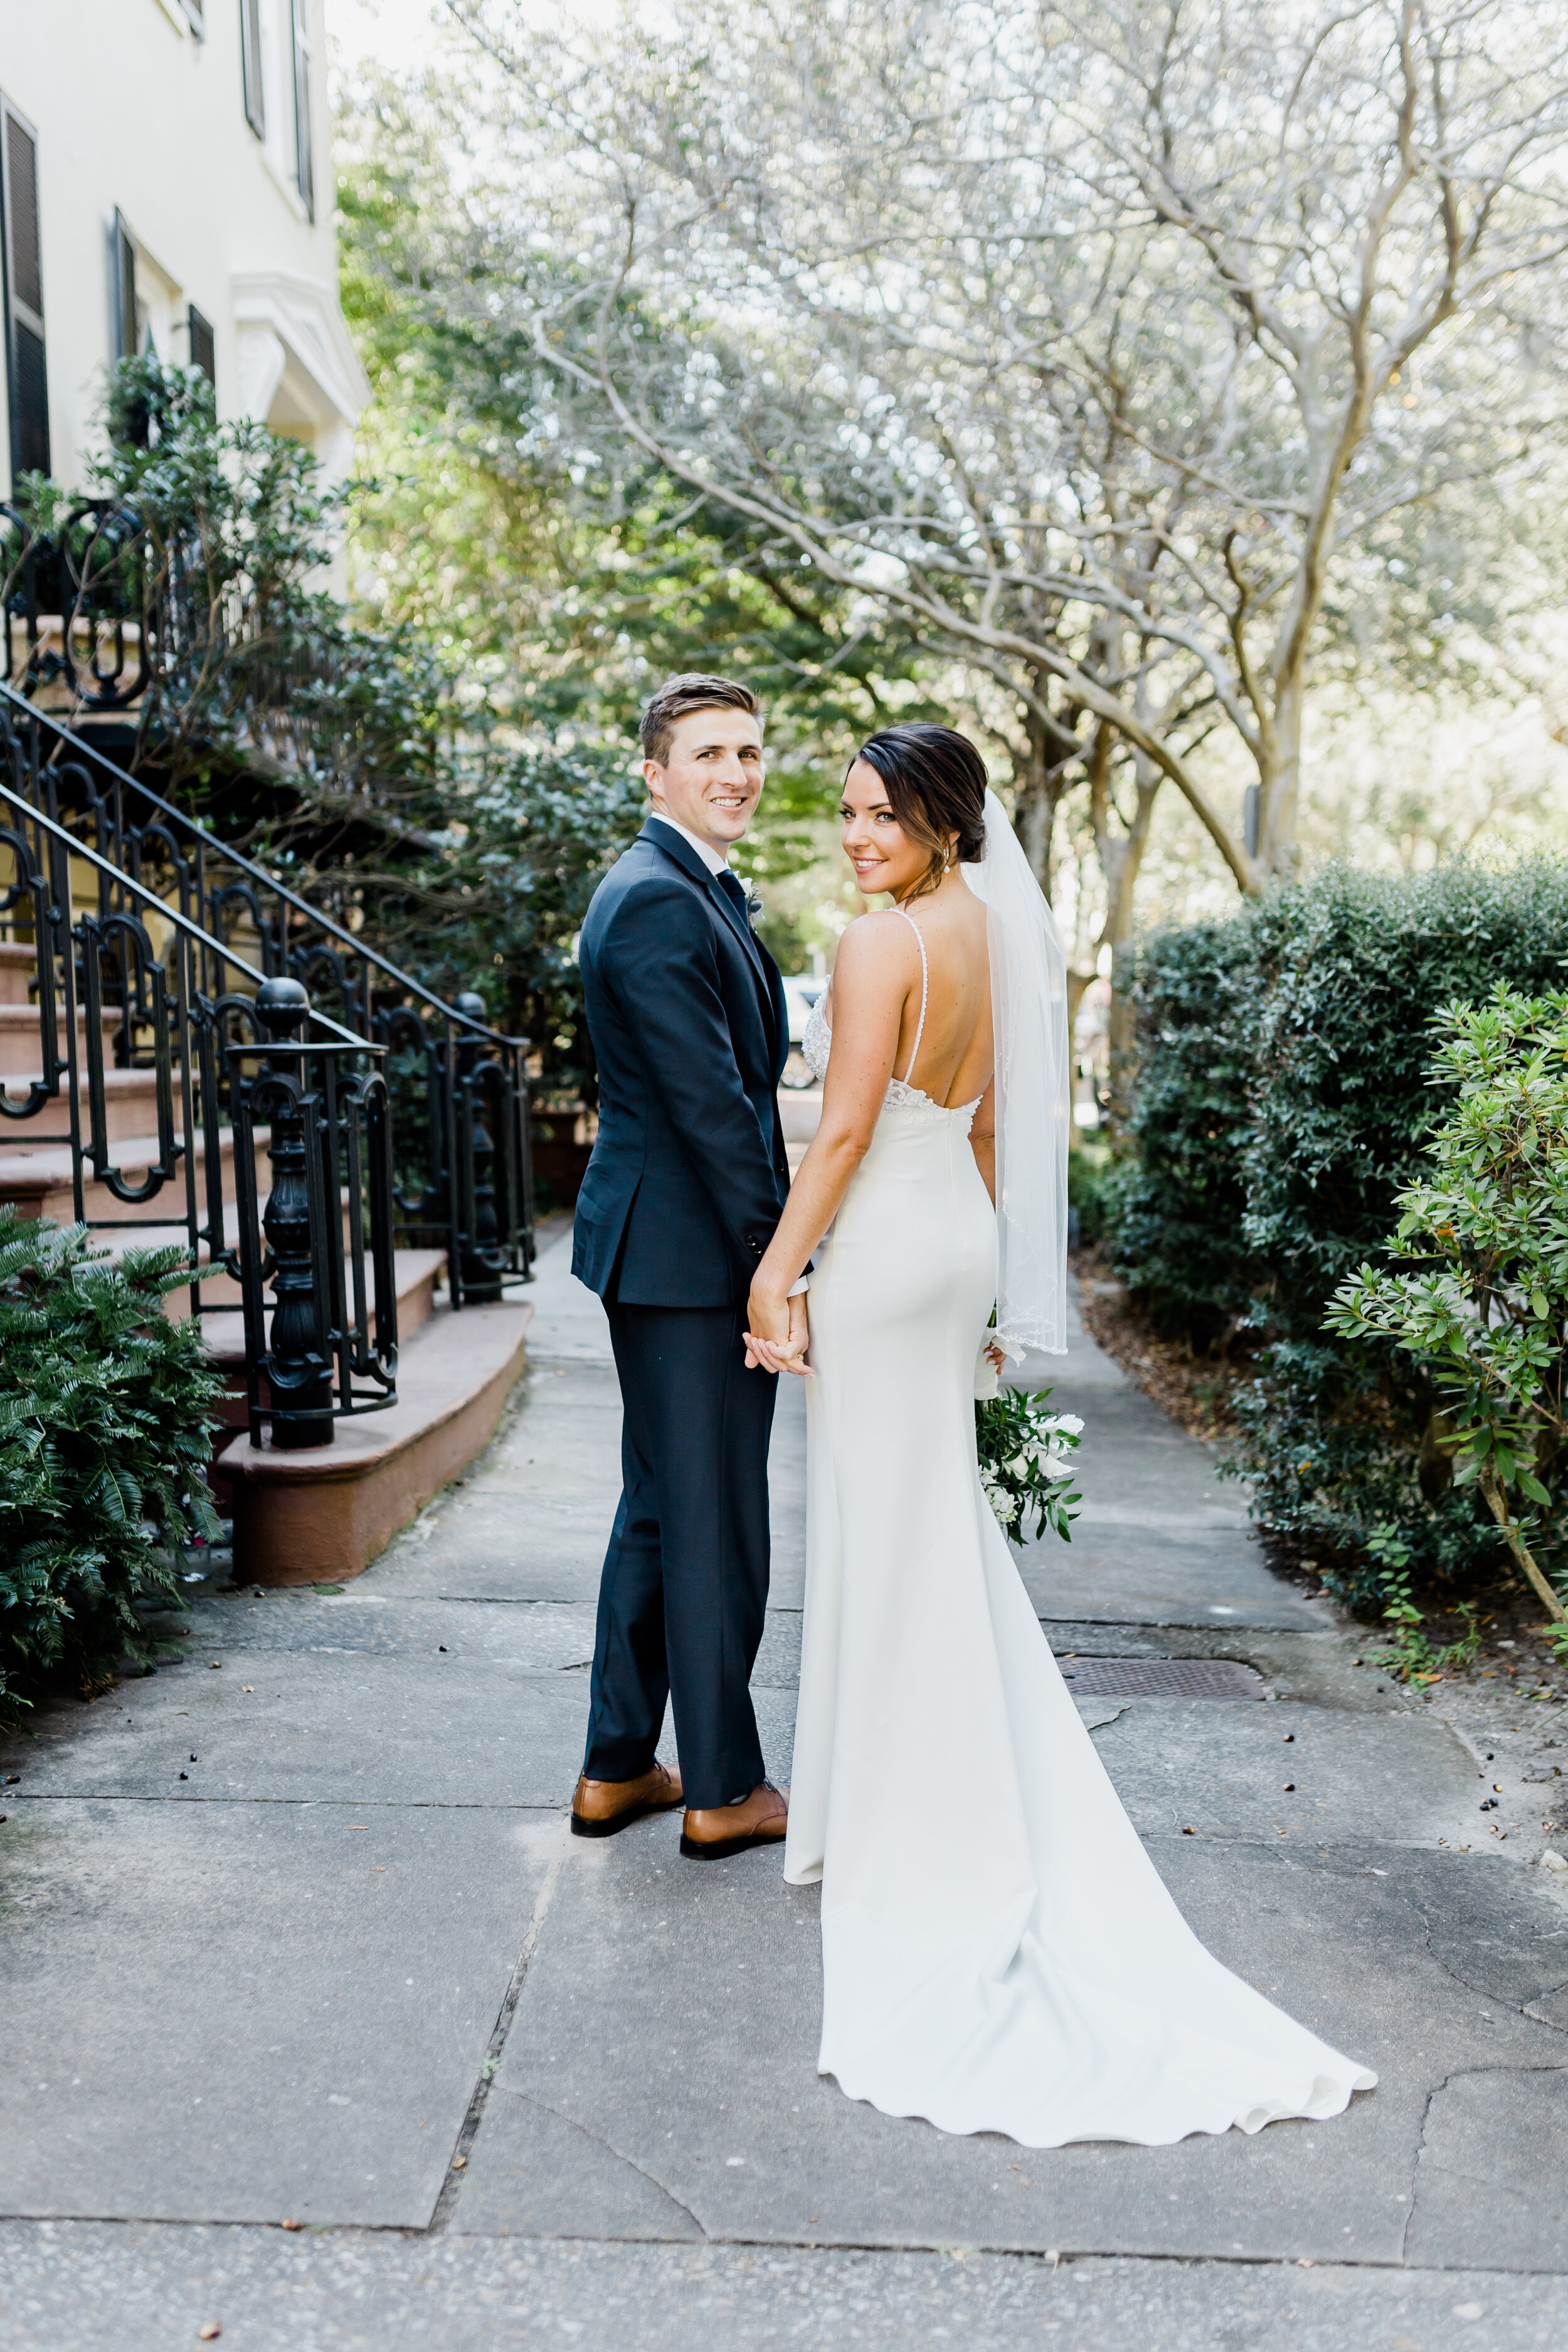 ivory-and-beau-bride-rosemary-wedding-dress-made-with-love-bridal-bridal-gown-wedding-gown-real-bride-wedding-blog-bridal-blog-bridal-shop-savannah-georgia-bridal-boutique-Portrait-152.jpg